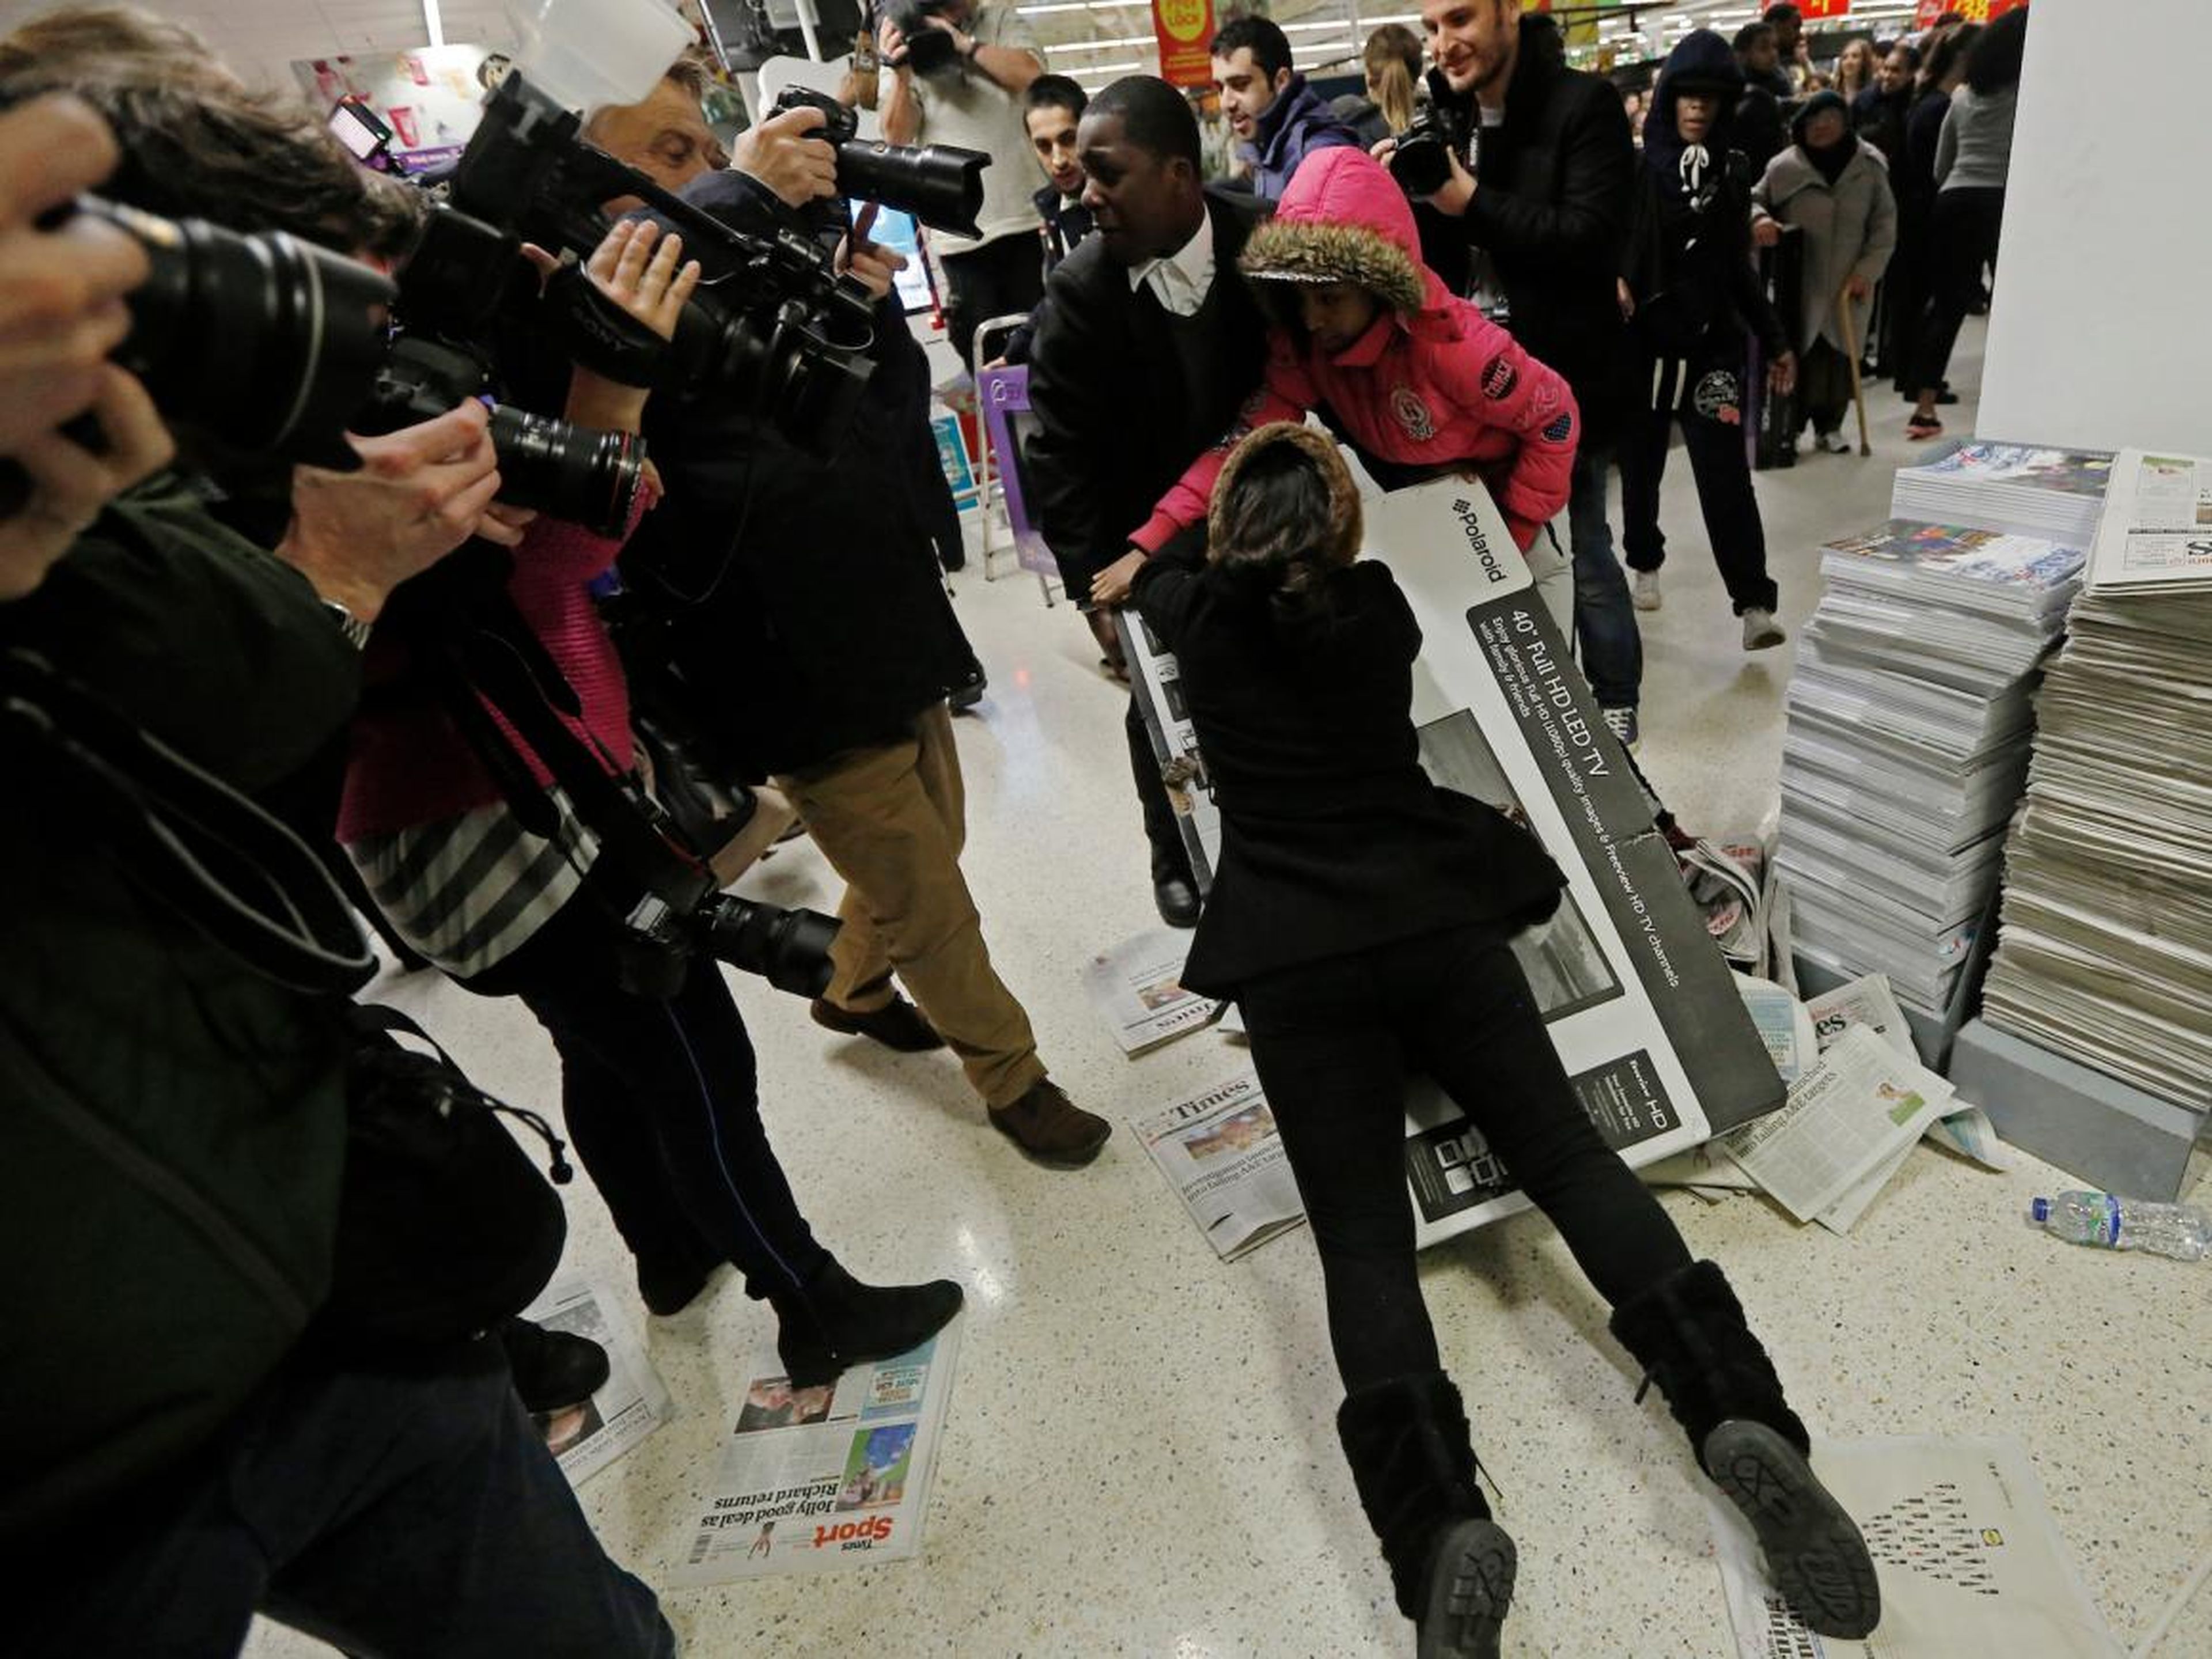 And, like in the US, bargain hunters have been known to get quite competitive in stores on Black Friday.